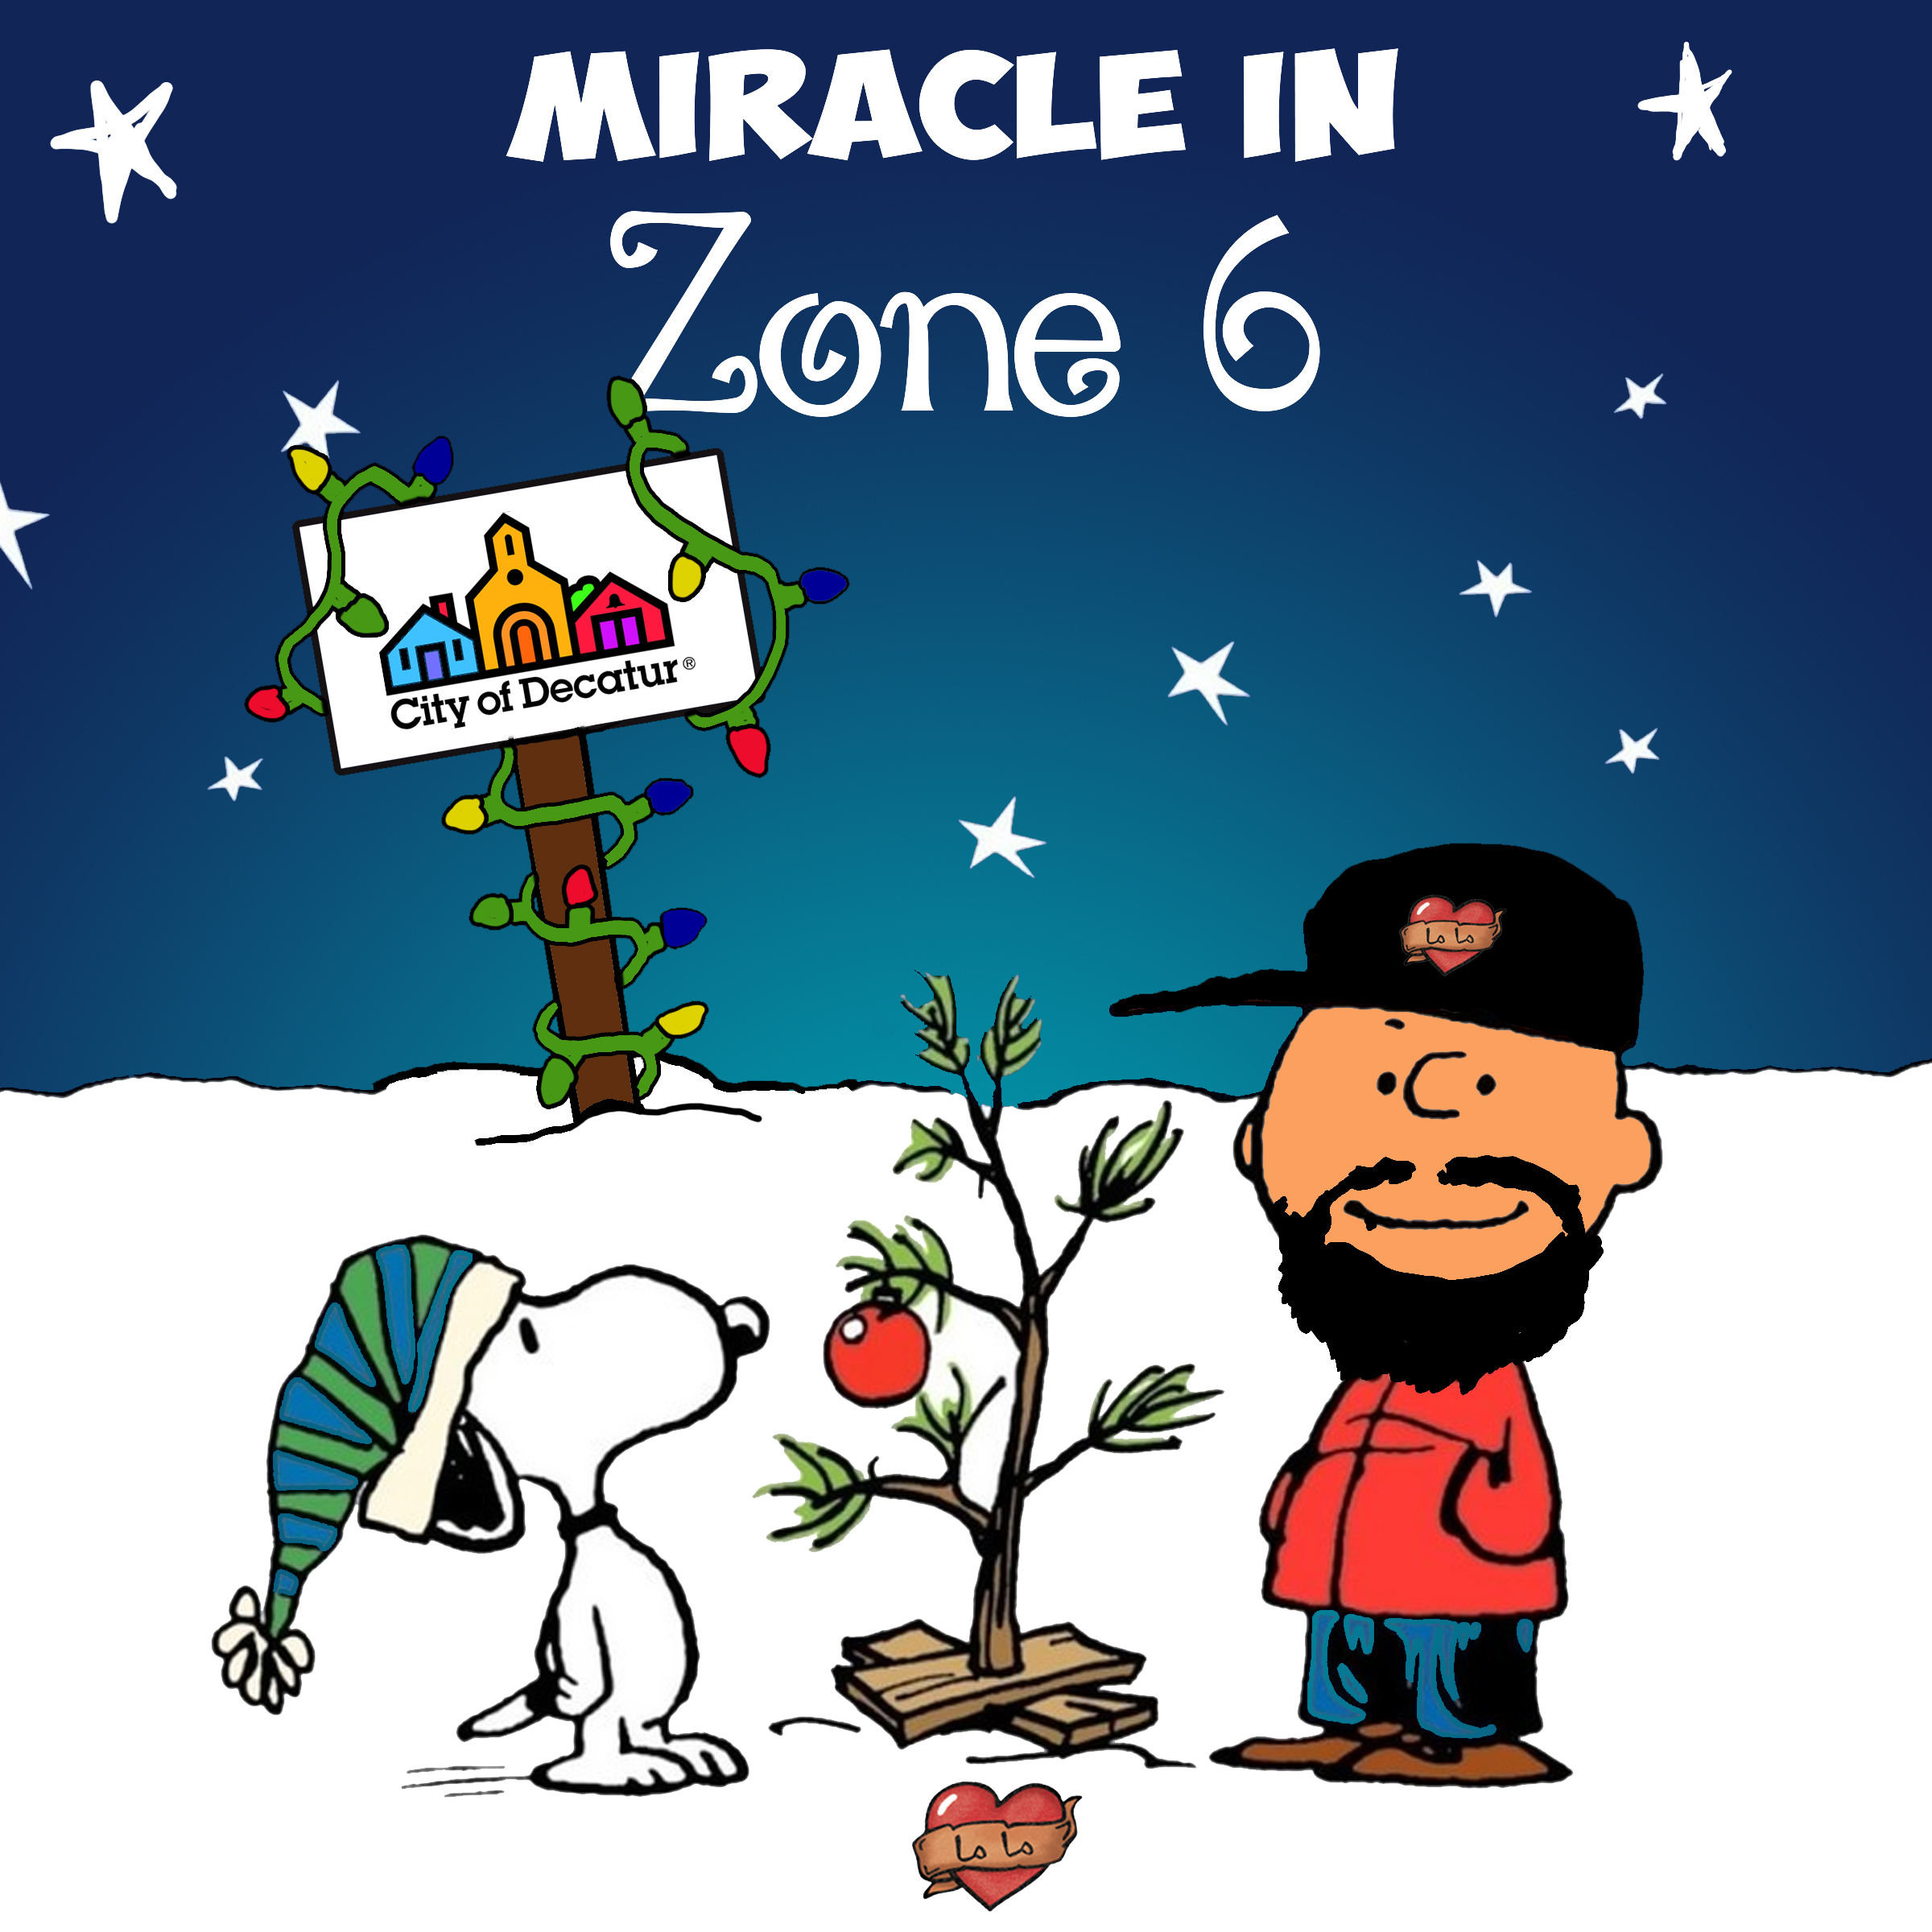 Miracle in Zone 6